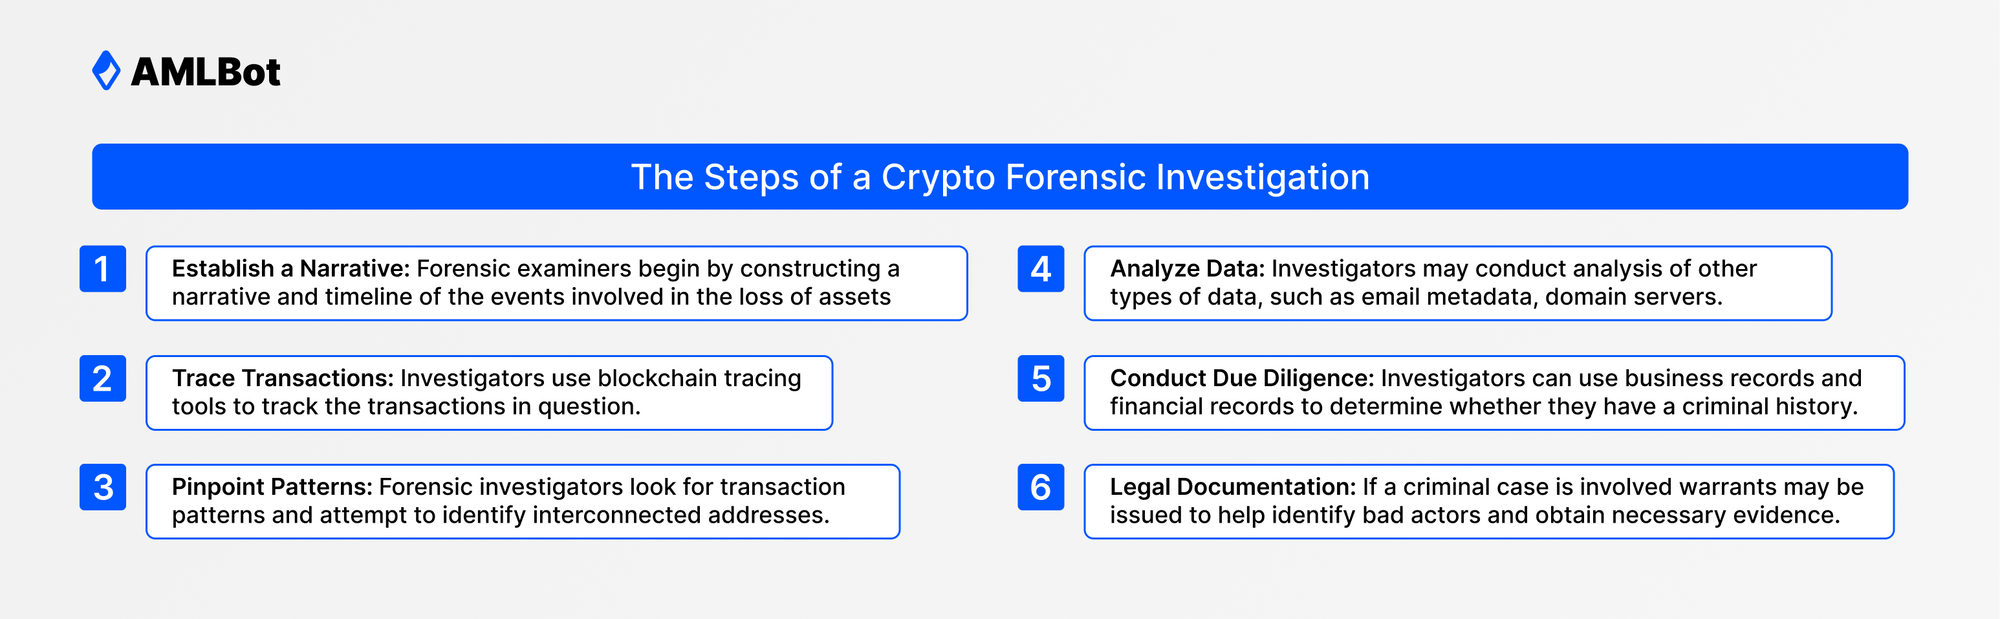 The Steps of a Crypto Forensic Investigation